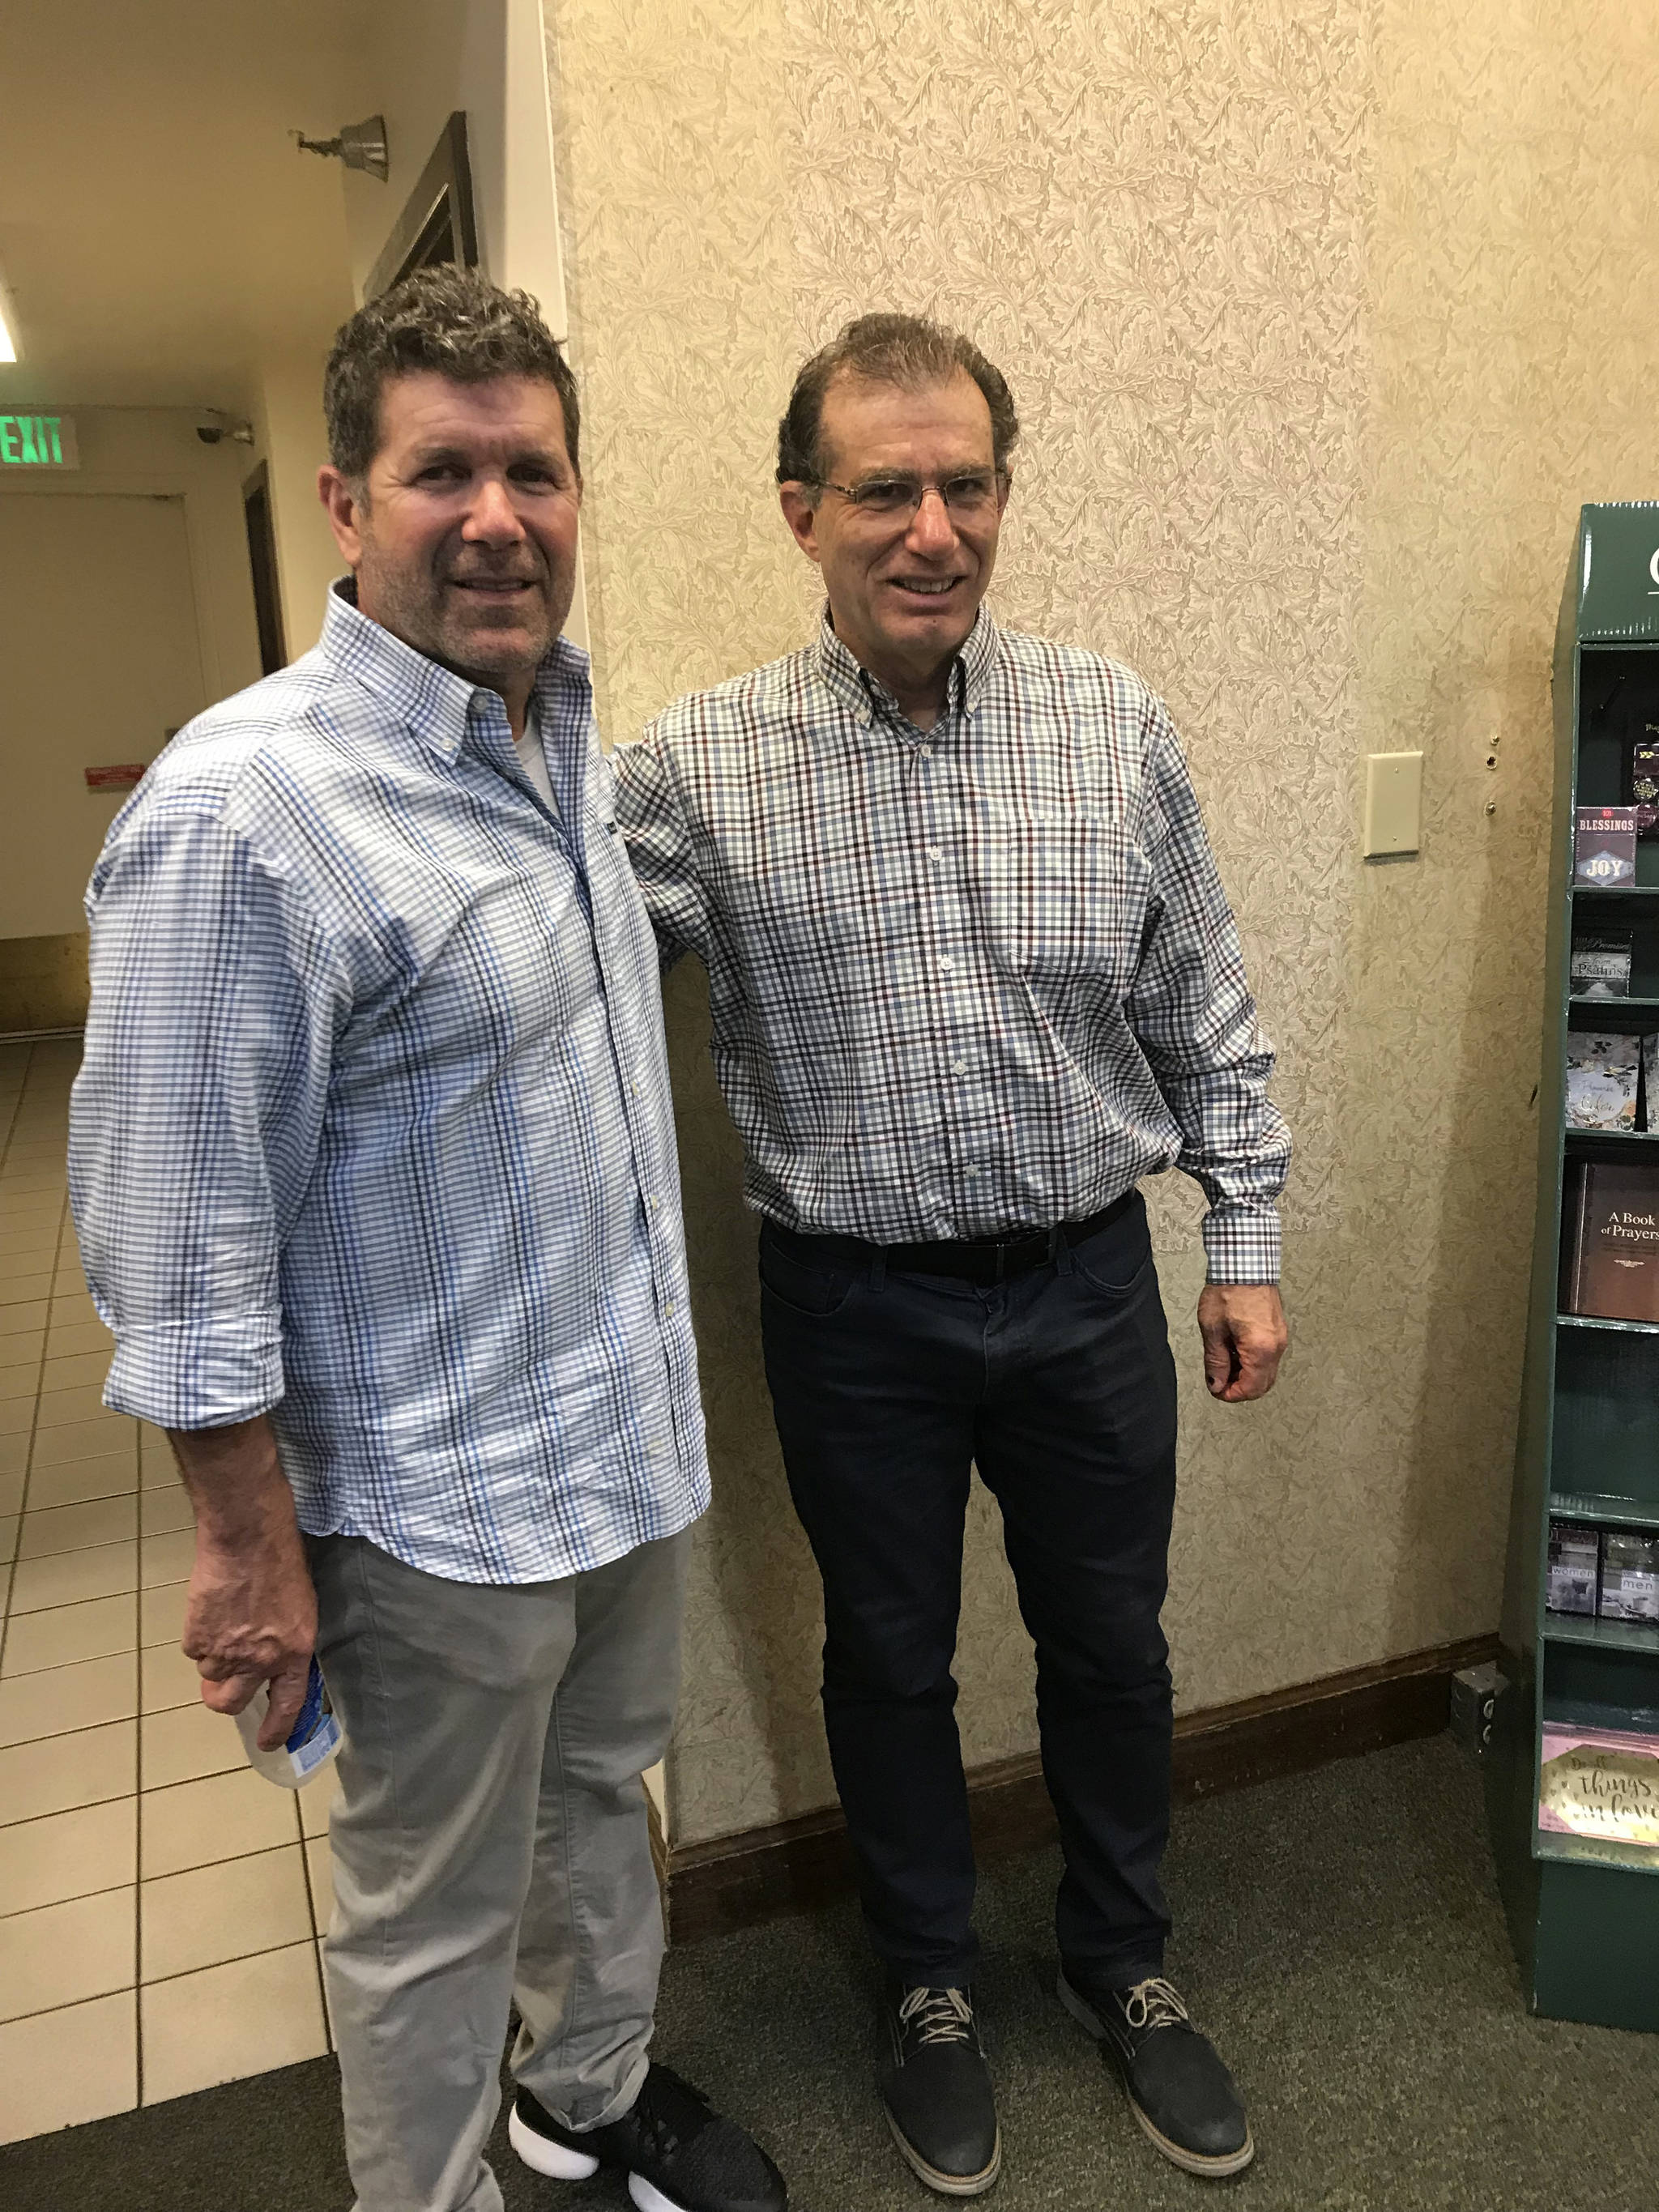 Seattle Mariners legend Edgar Martinez, left, and Seattle Times Columnist Larry Stone, right, collaborated on a book titled, “Edgar: An Autobiography.” Martinez and Stone attended a book signing on June 12 at Barnes Noble in Bellevue. Shaun Scott/staff photo